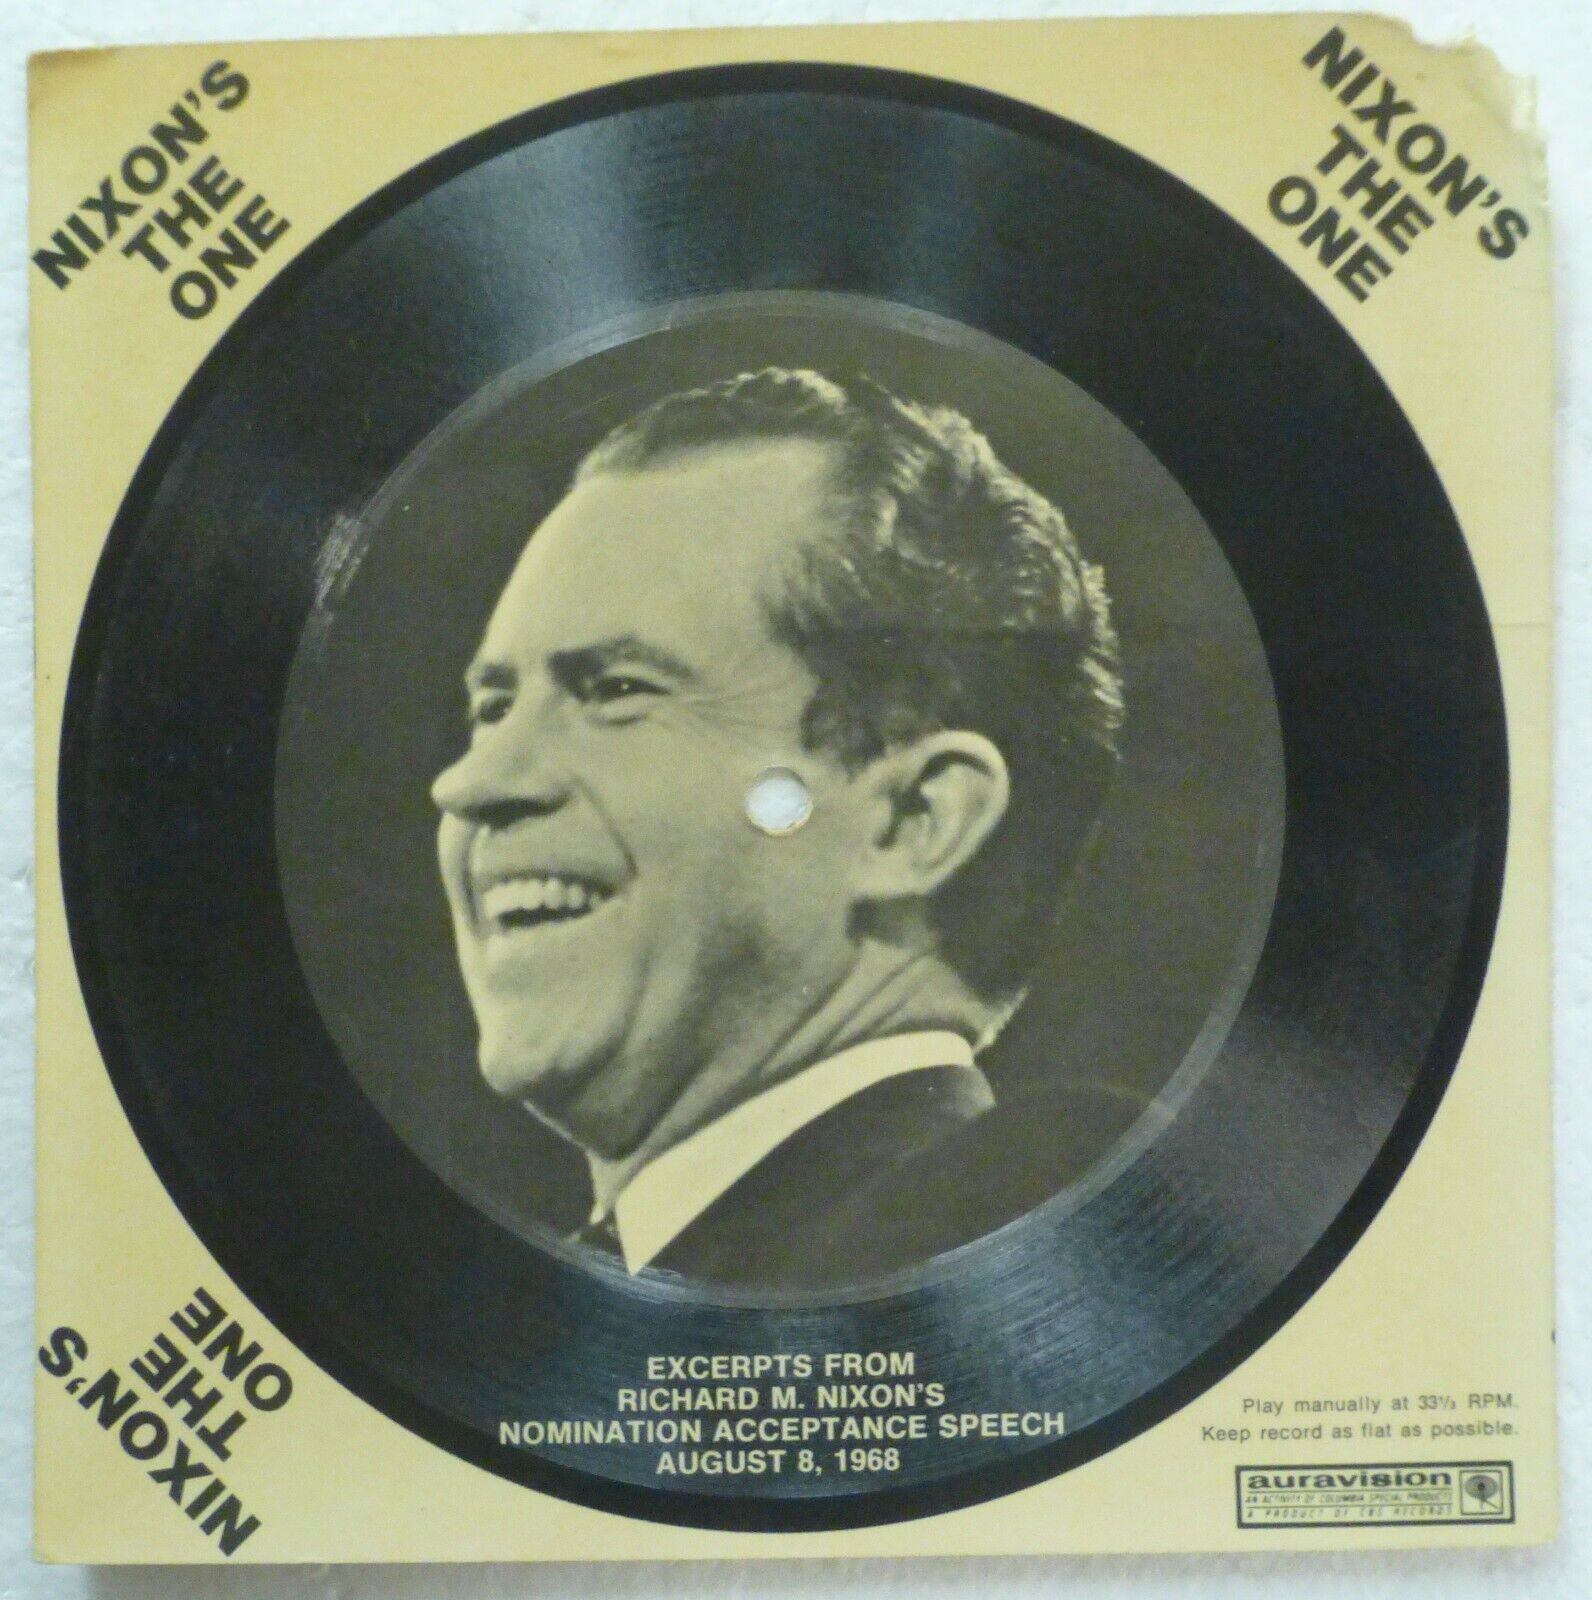 NIXON\'S THE ONE Excerpts from 1968 nomination acceptance speech FLEXI-DISC Rp267